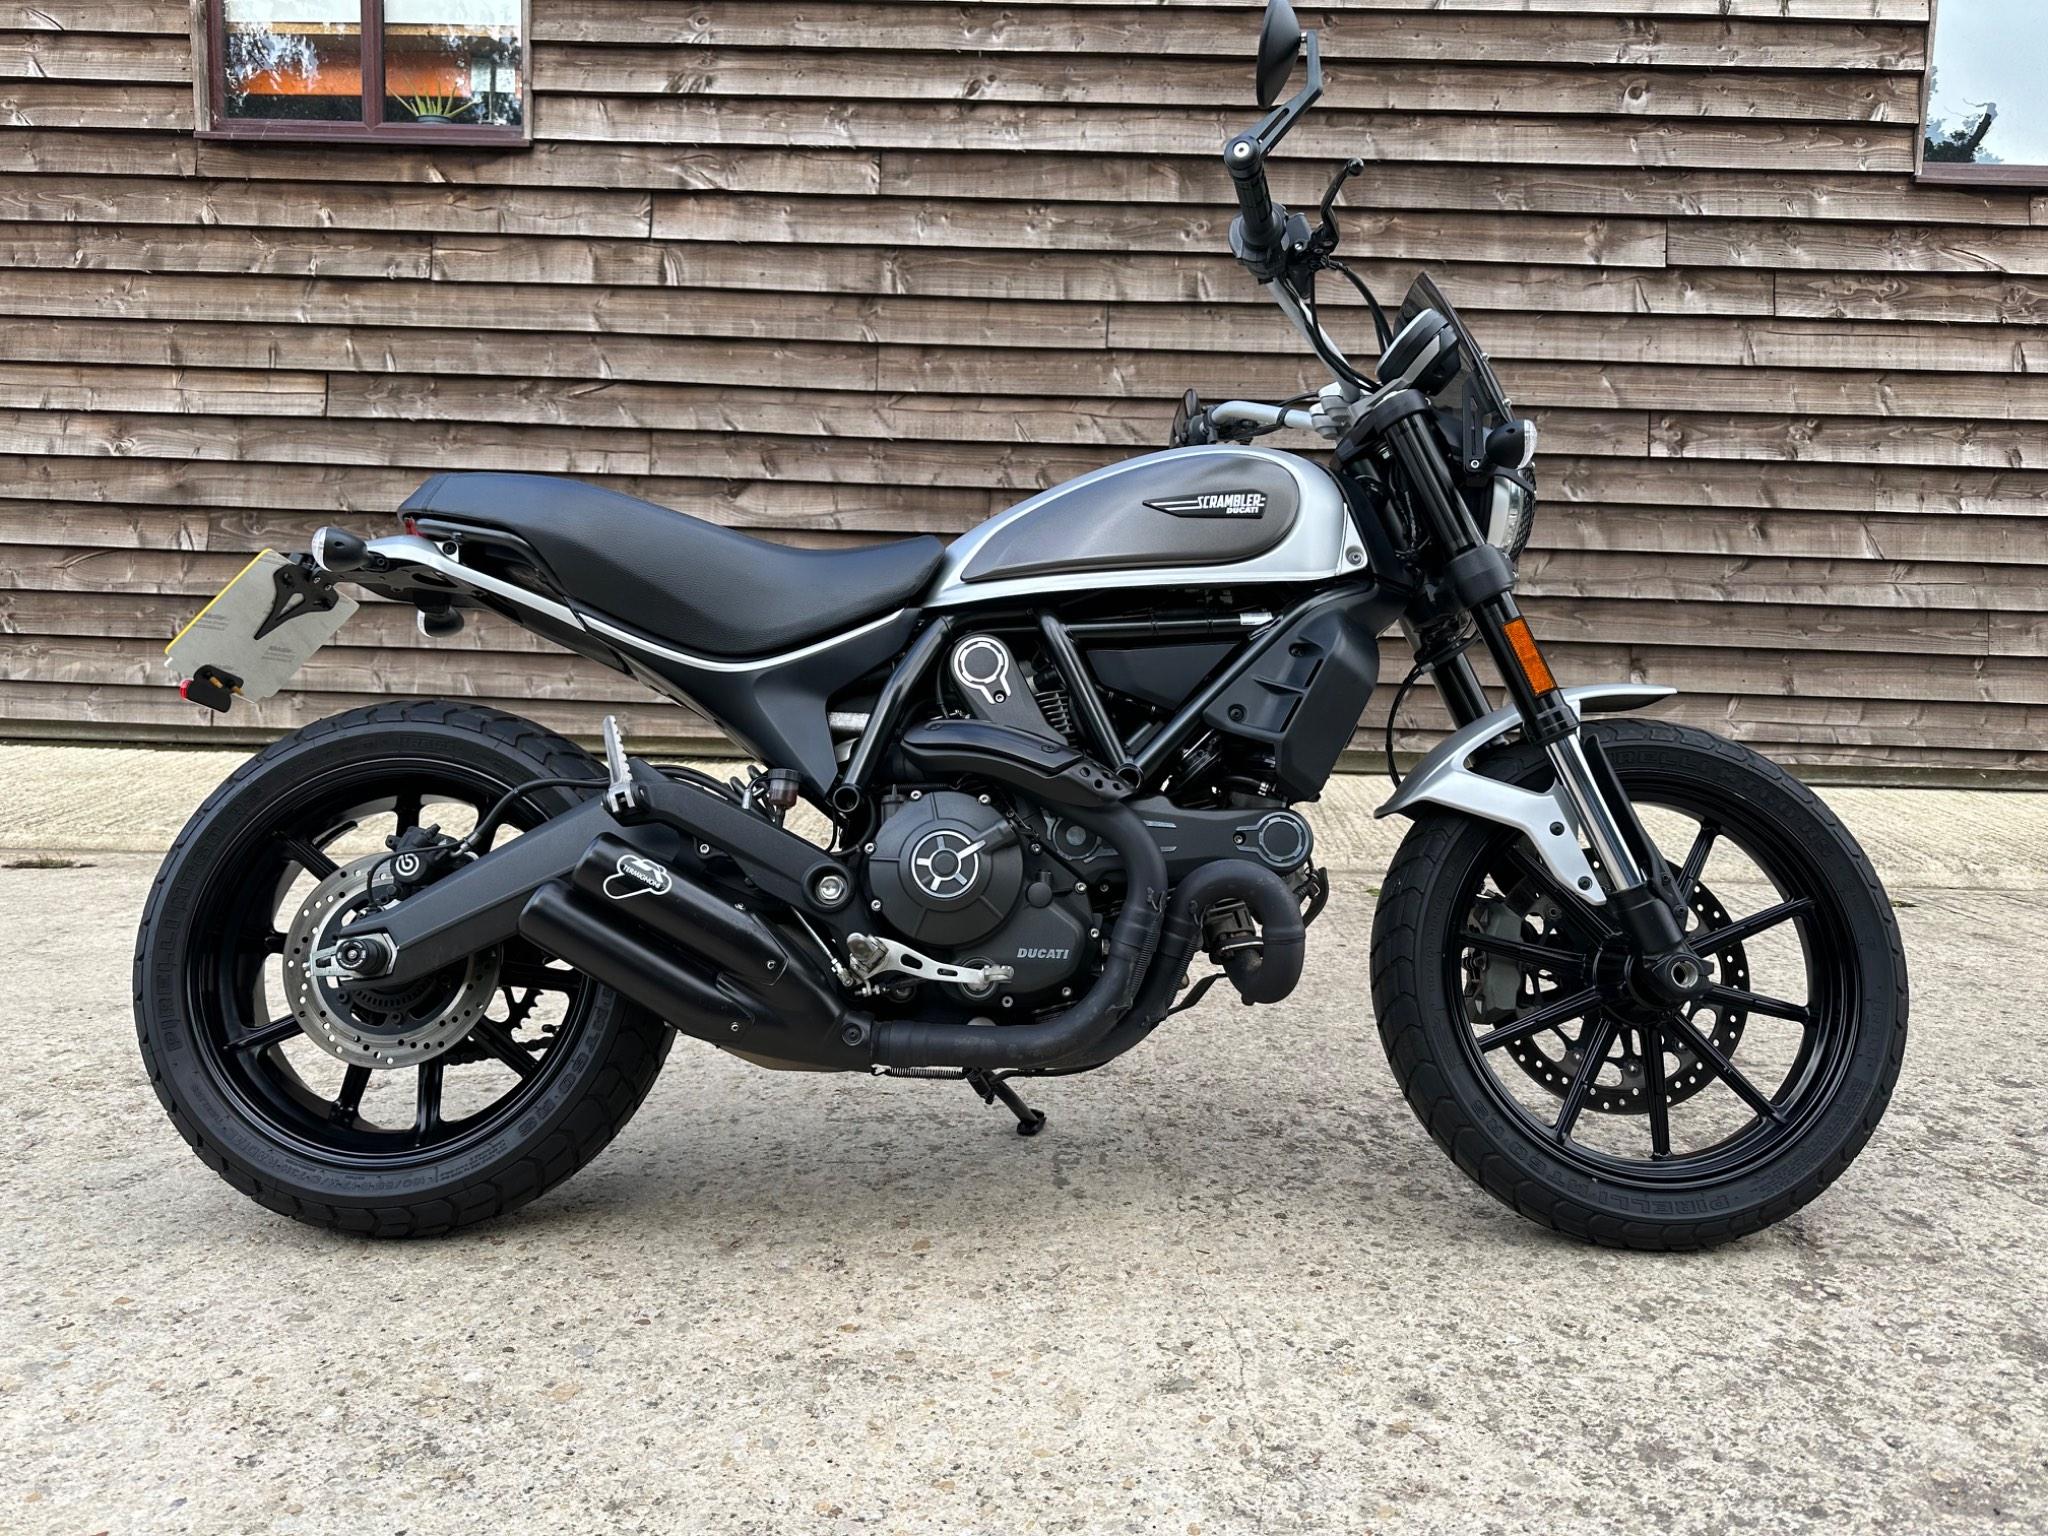 2017 Ducati Scrambler 800 800 Icon ABS (Yellow or Silver Color) From £115.75 per month 